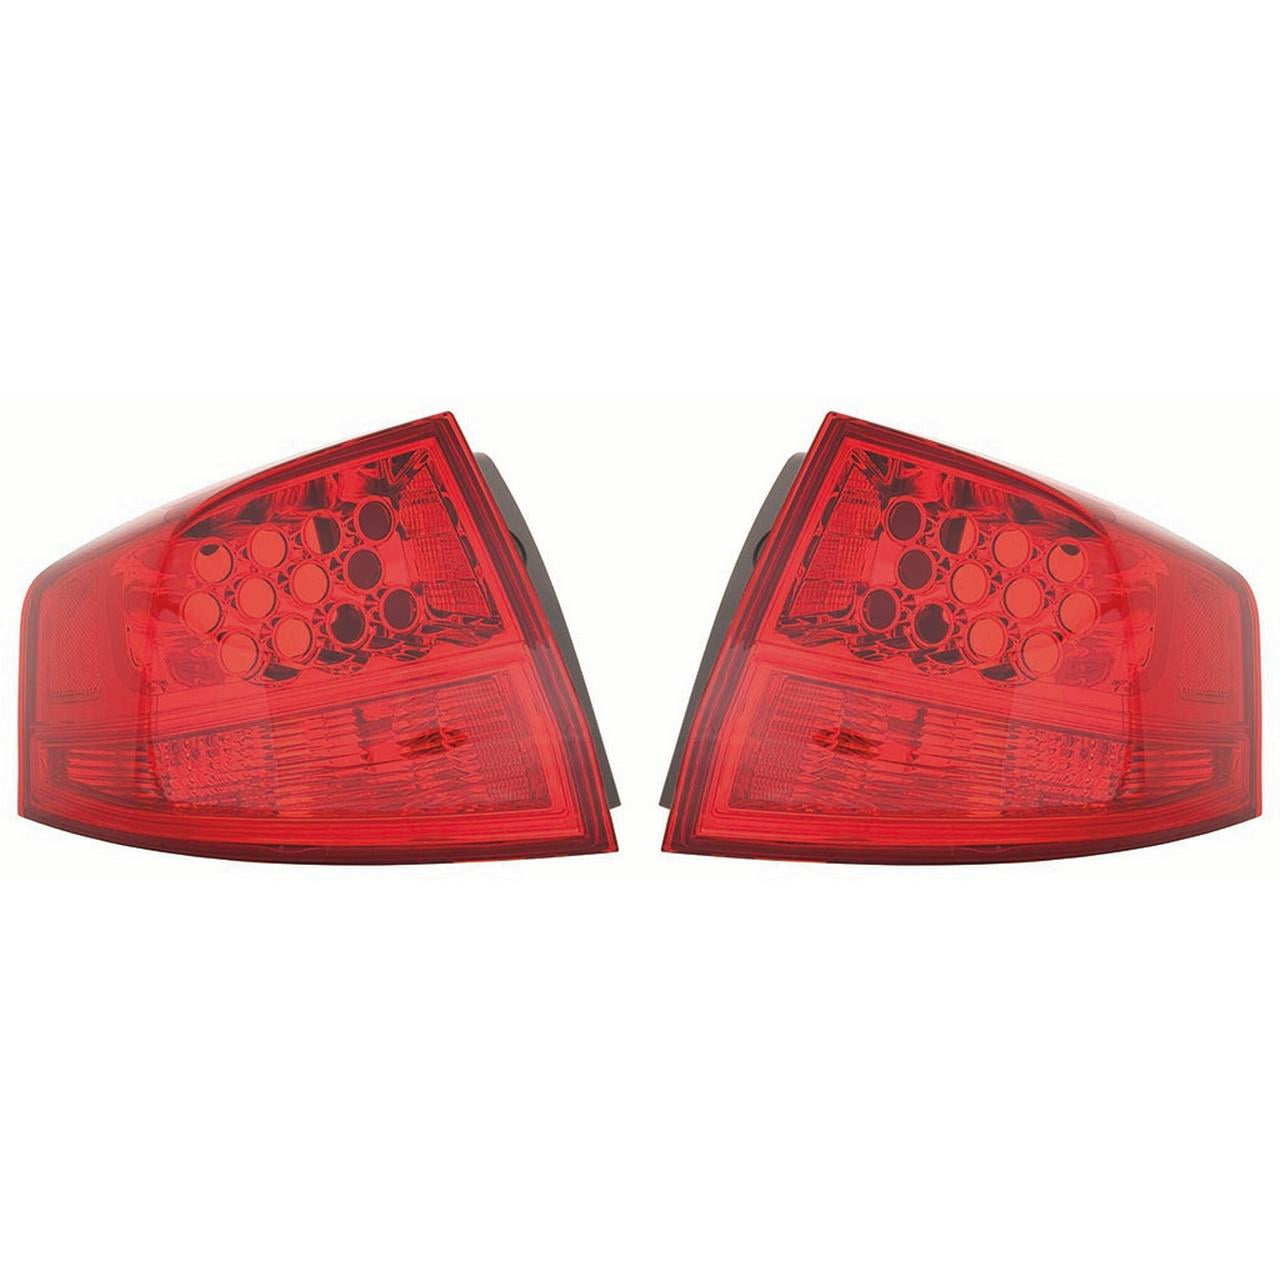 04-06 Acura MDX Taillight Taillamp Rear Brake Light Lamp Left Driver Side LH NEW